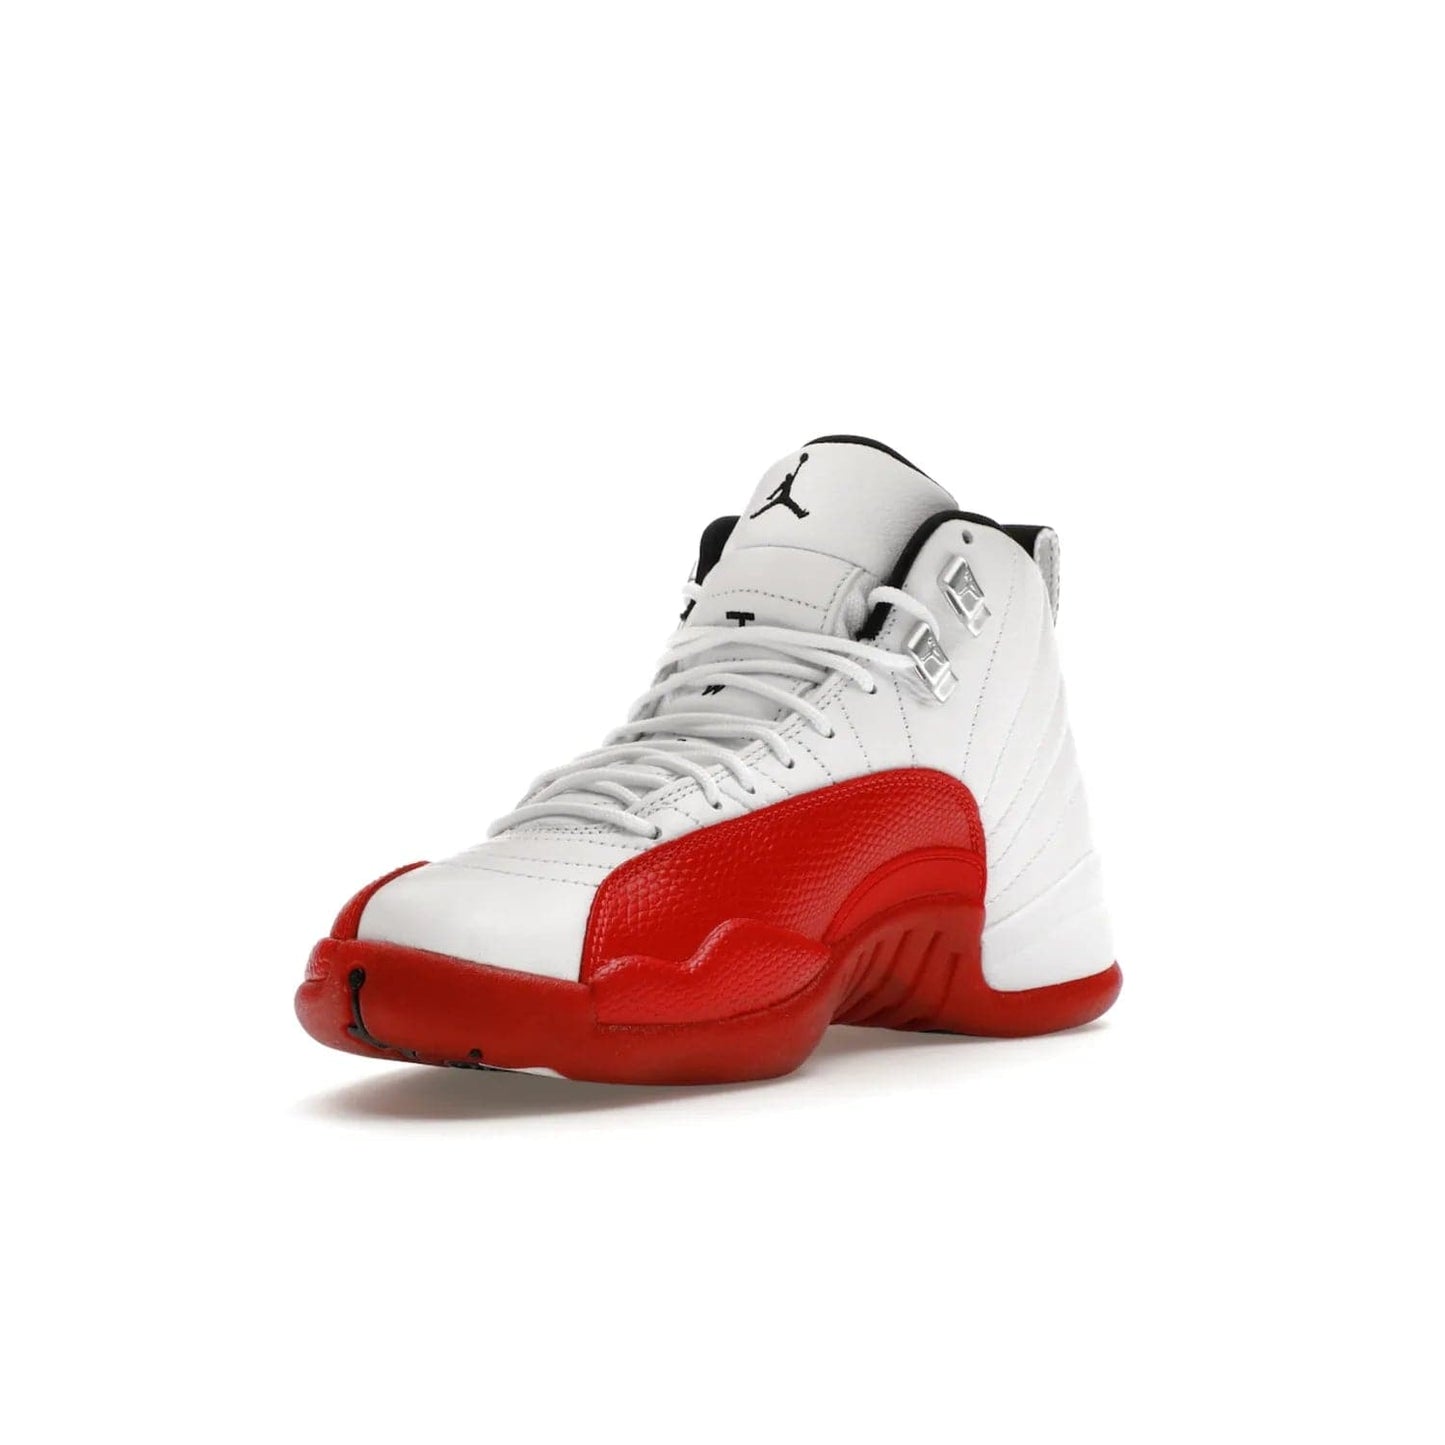 Jordan 12 Retro Cherry (2023) - Image 14 - Only at www.BallersClubKickz.com - Live your sneaker legend with the Jordan 12 Retro Cherry. Iconic pebbled leather mudguards, quilted uppers, and varsity red accents make this 1997 classic a must-have for 2023. Shine on with silver hardware and matching midsoles, and bring it all together for limited-edition style on October 28th. Step into Jordan legacy with the Retro Cherry.